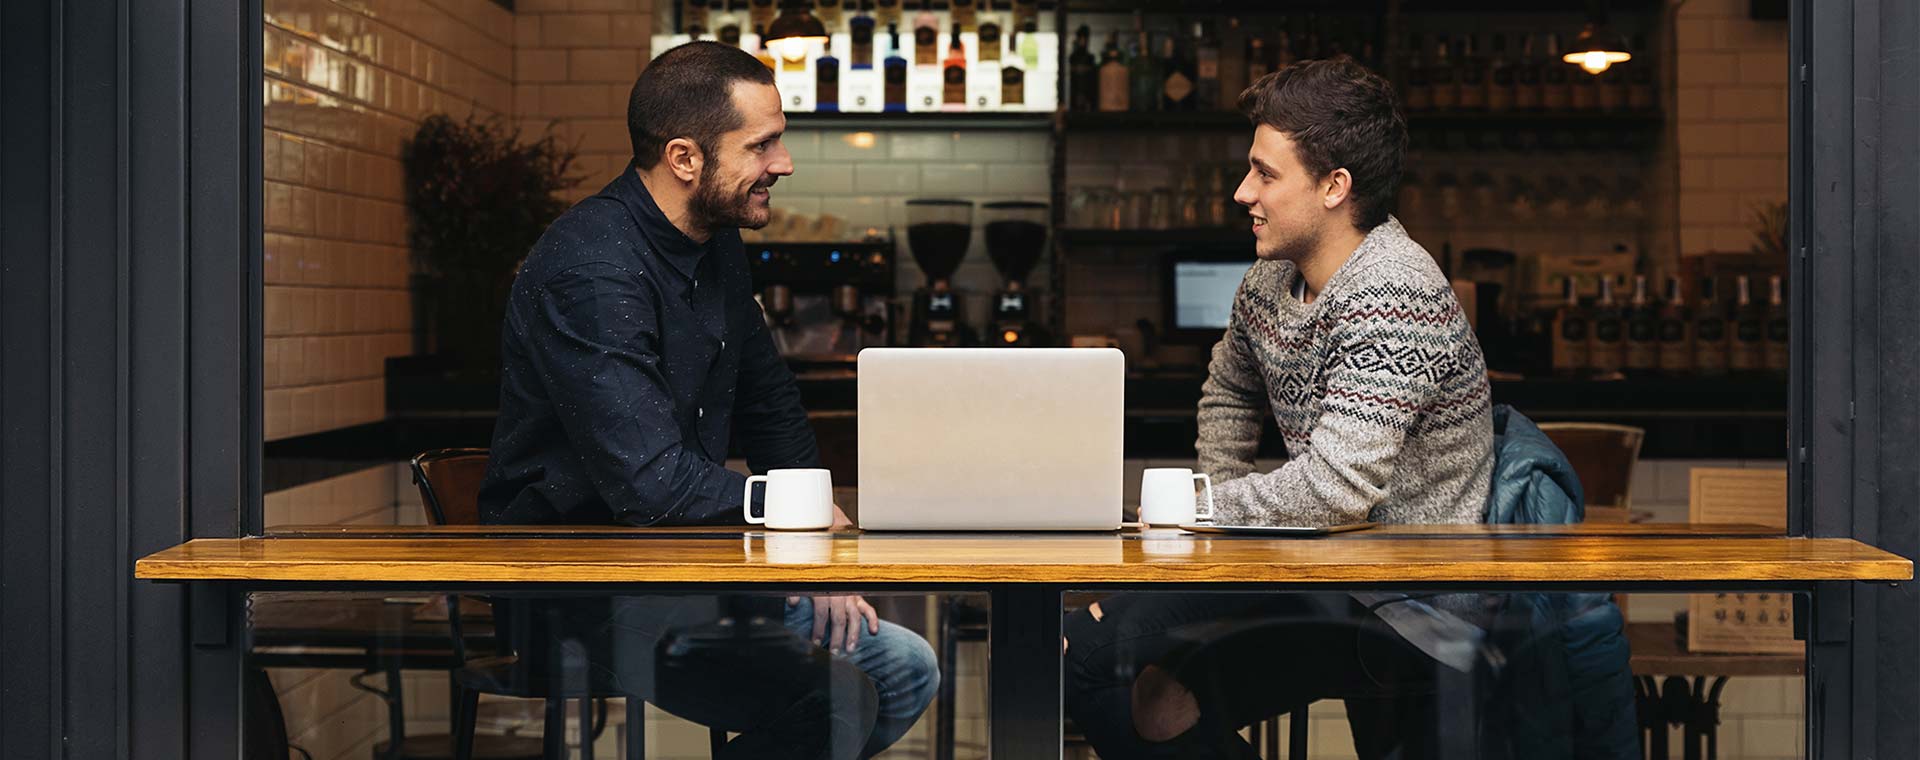 Two men are in a coffee shop sitting at a table, which looks out onto a street, talking to each other over a laptop. They each have a coffee mug, one is wearing a navy blue top and the other has a grey knit sweater on.